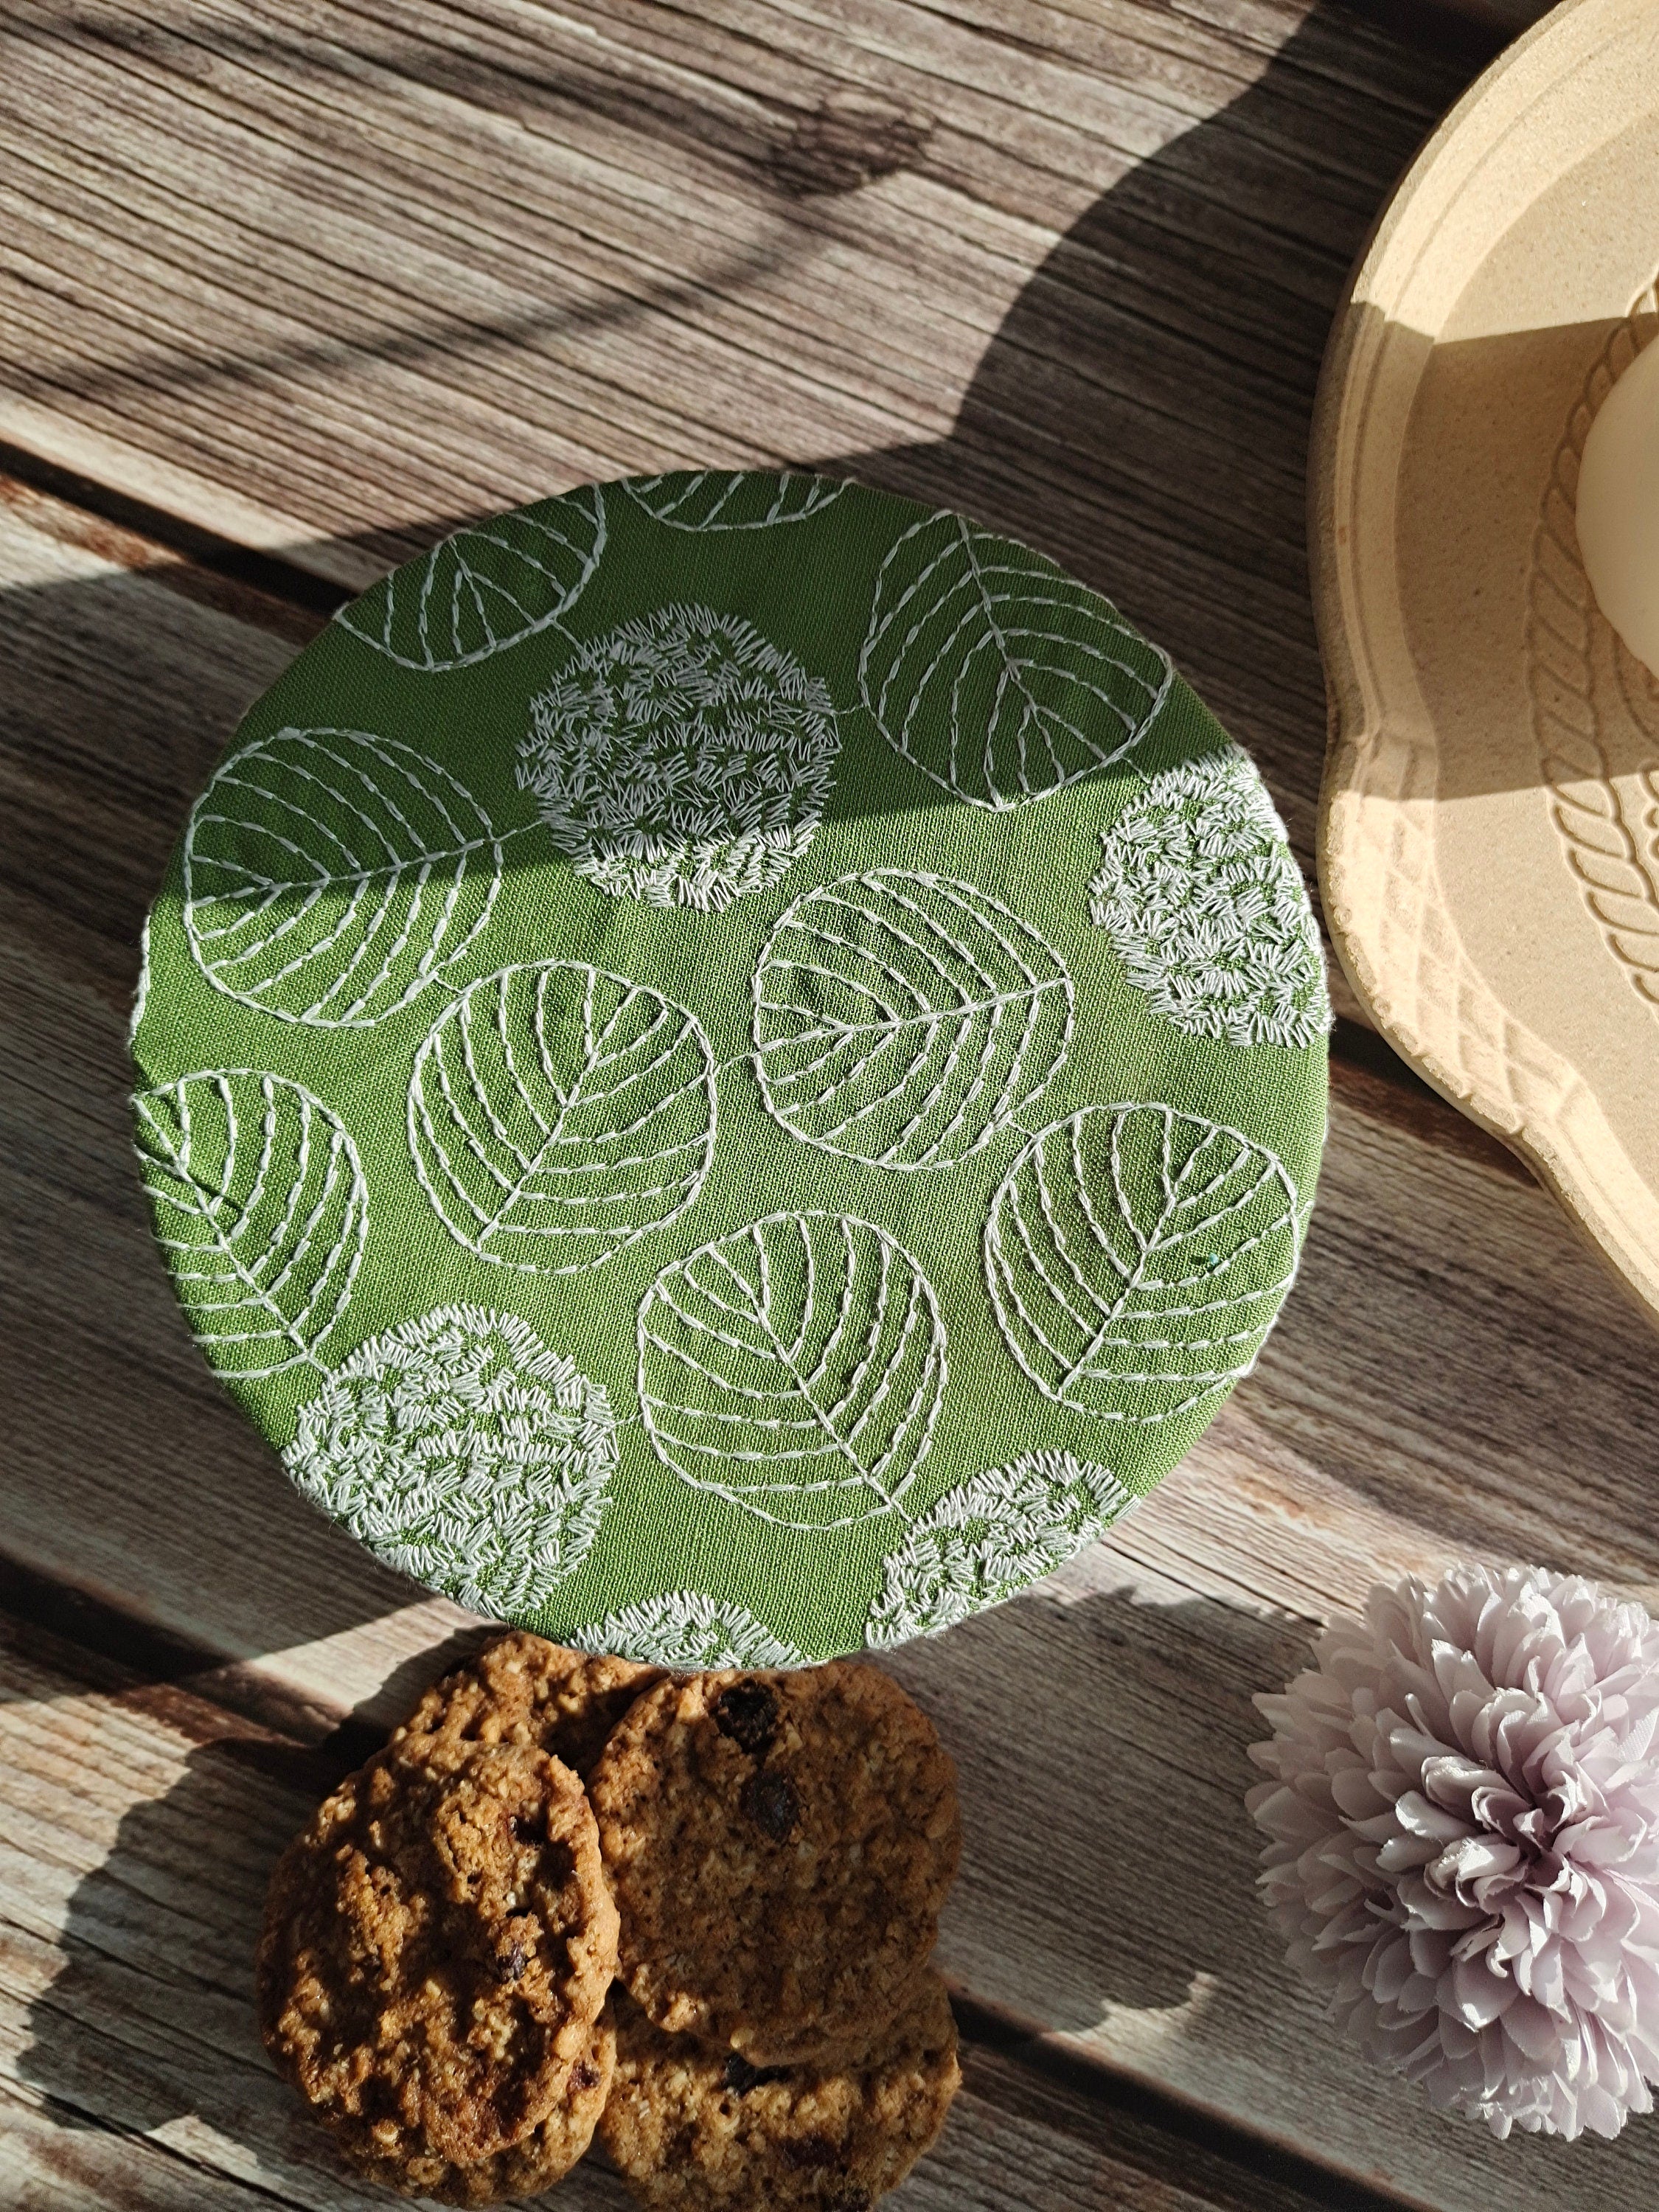 Reusable Bowl Covers Bread Proofing Cover Bread Baking Supplies, Washable Zero Waste Swap, Christmas Gift housewarming beige leaves